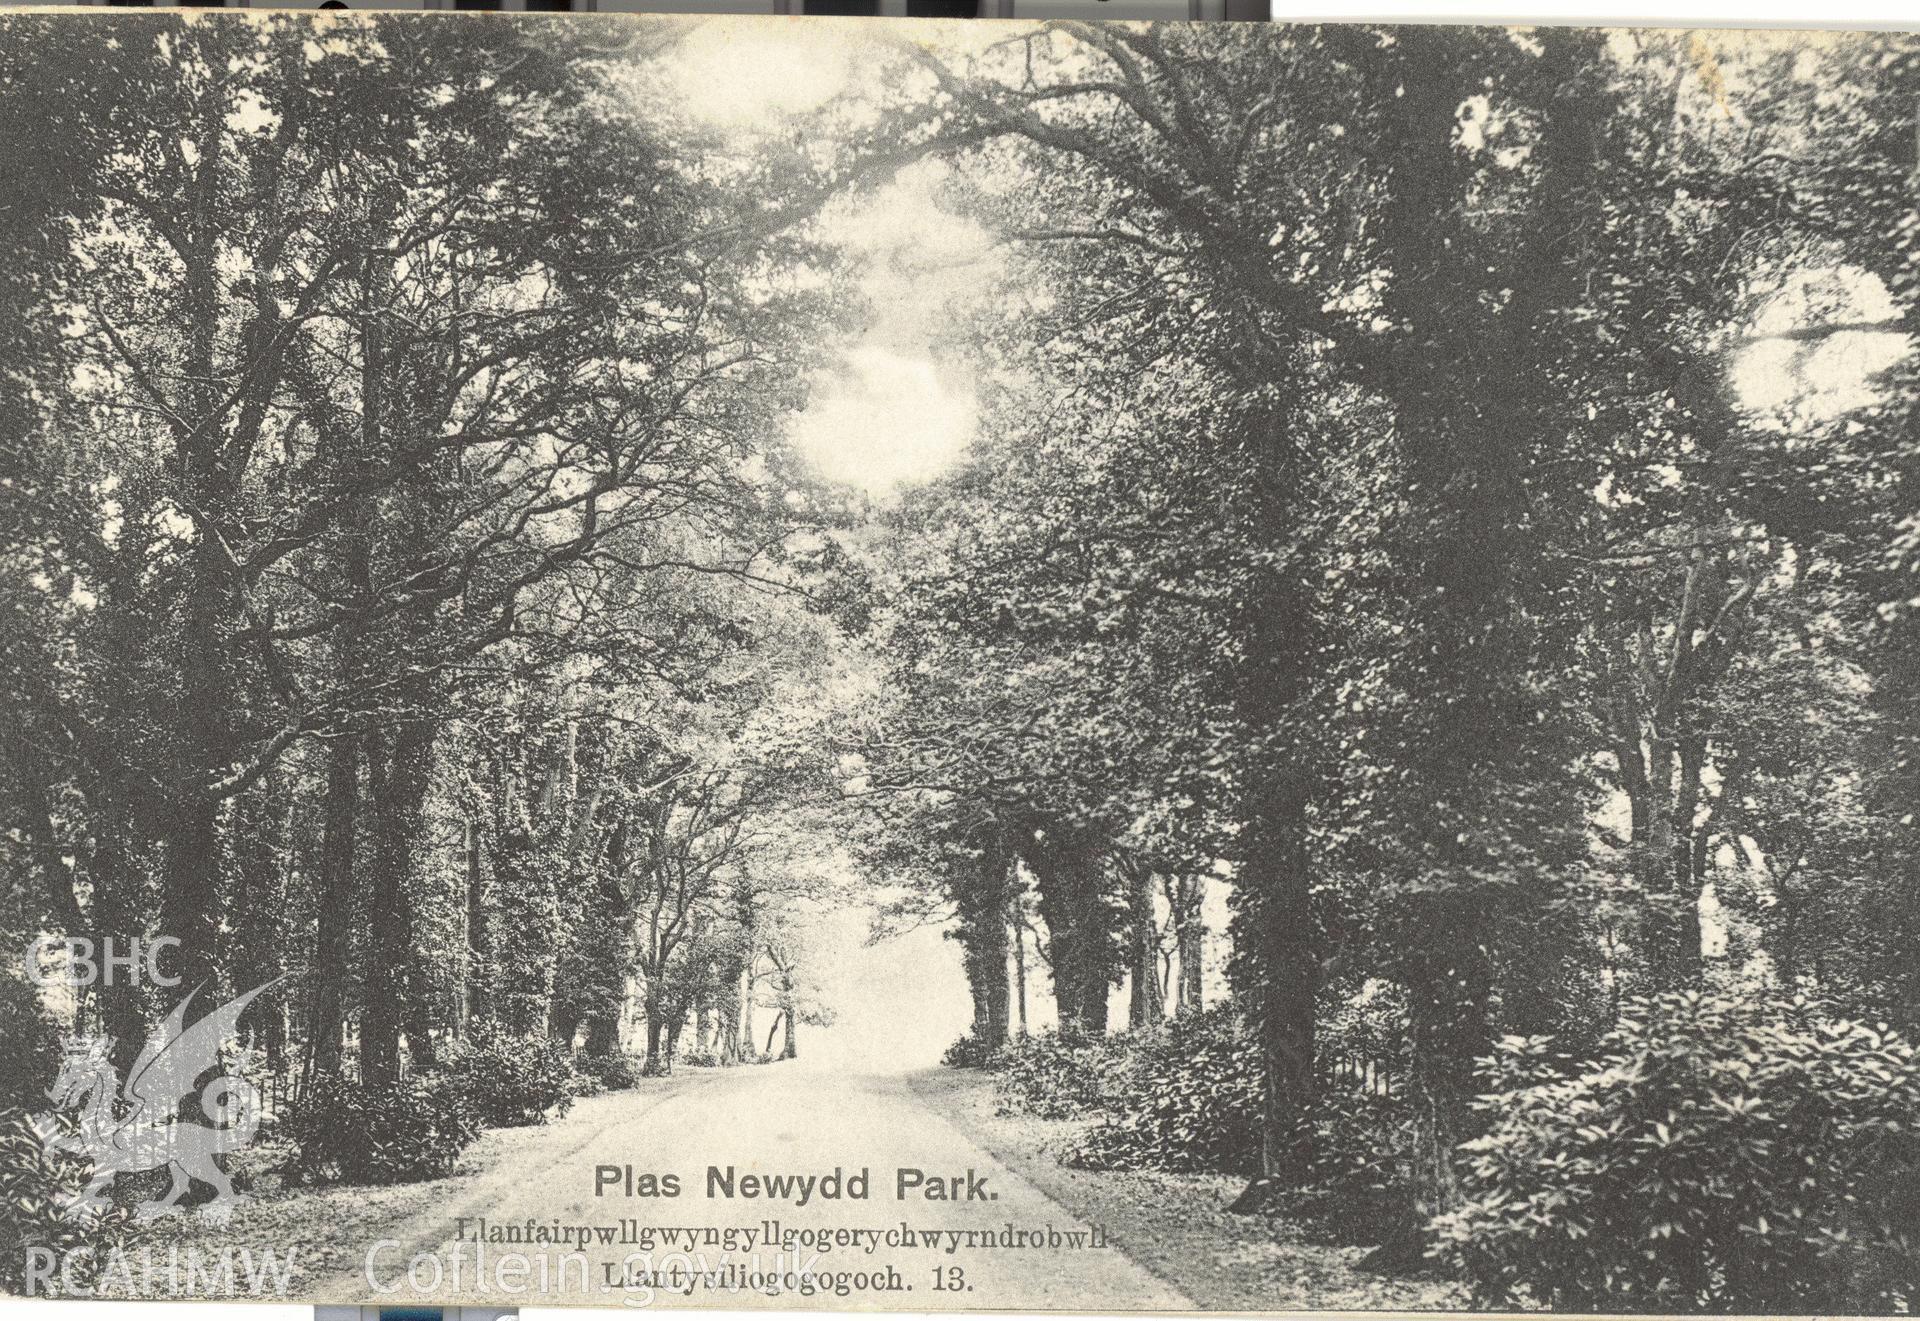 Digitised postcard image of Plas Newydd grounds, Llanddaniel Fab, E.E. Roberts' Series  LlanfairPG. Produced by Parks and Gardens Data Services, from an original item in the Peter Davis Collection at Parks and Gardens UK. We hold only web-resolution images of this collection, suitable for viewing on screen and for research purposes only. We do not hold the original images, or publication quality scans.